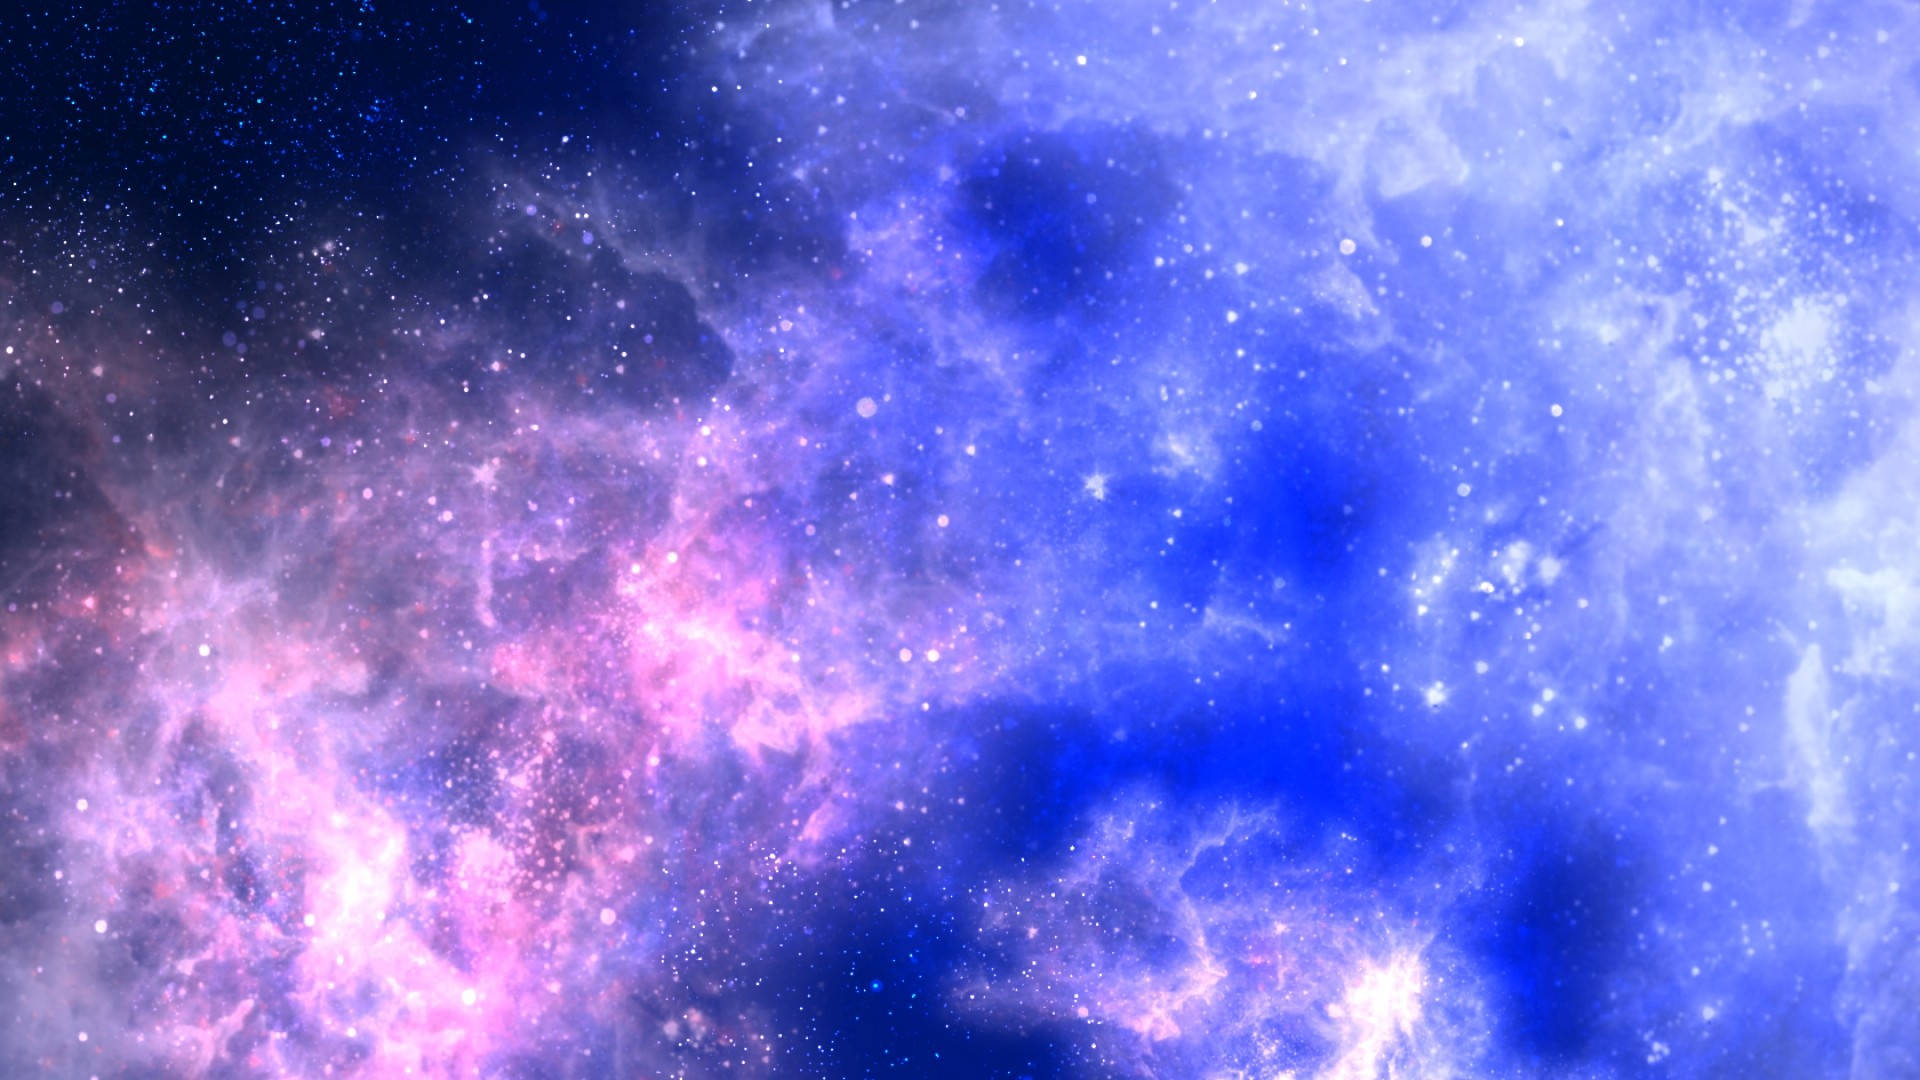 Midnight Shimmer - A Glimpse Of The Purple Galaxy Background